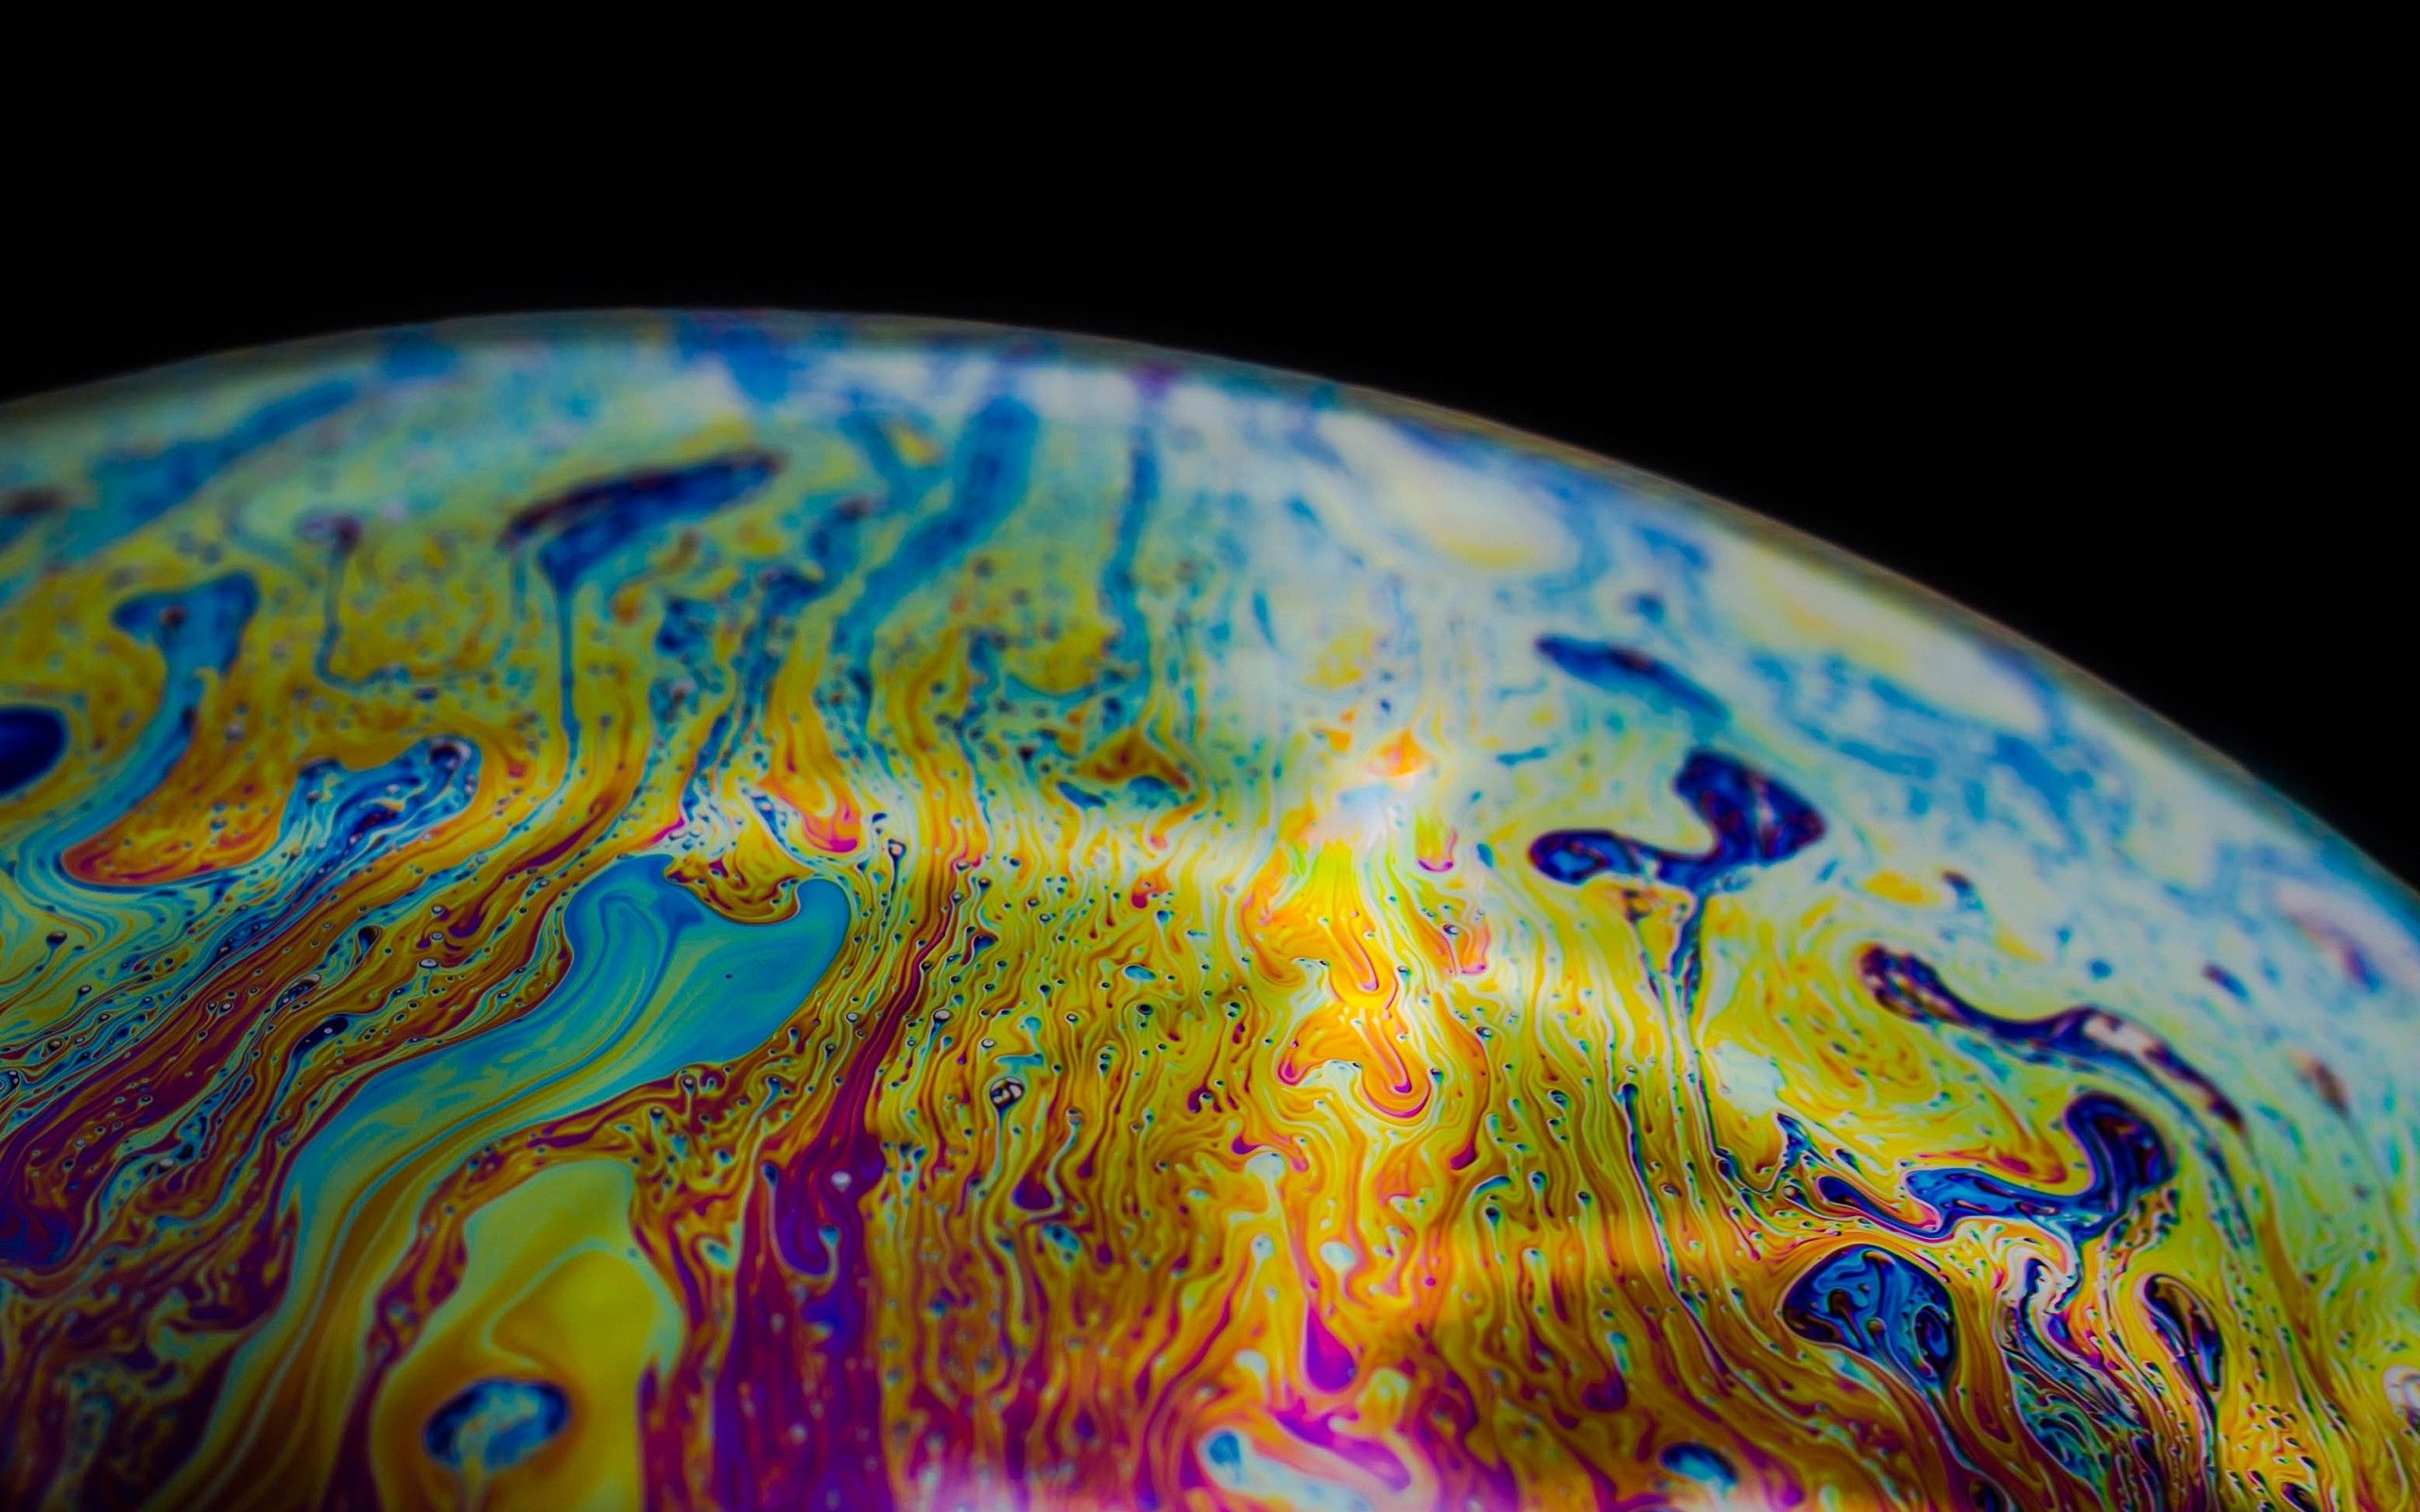 soap, Bubbles, Macro, Abstract, Colorful, Photography, Black